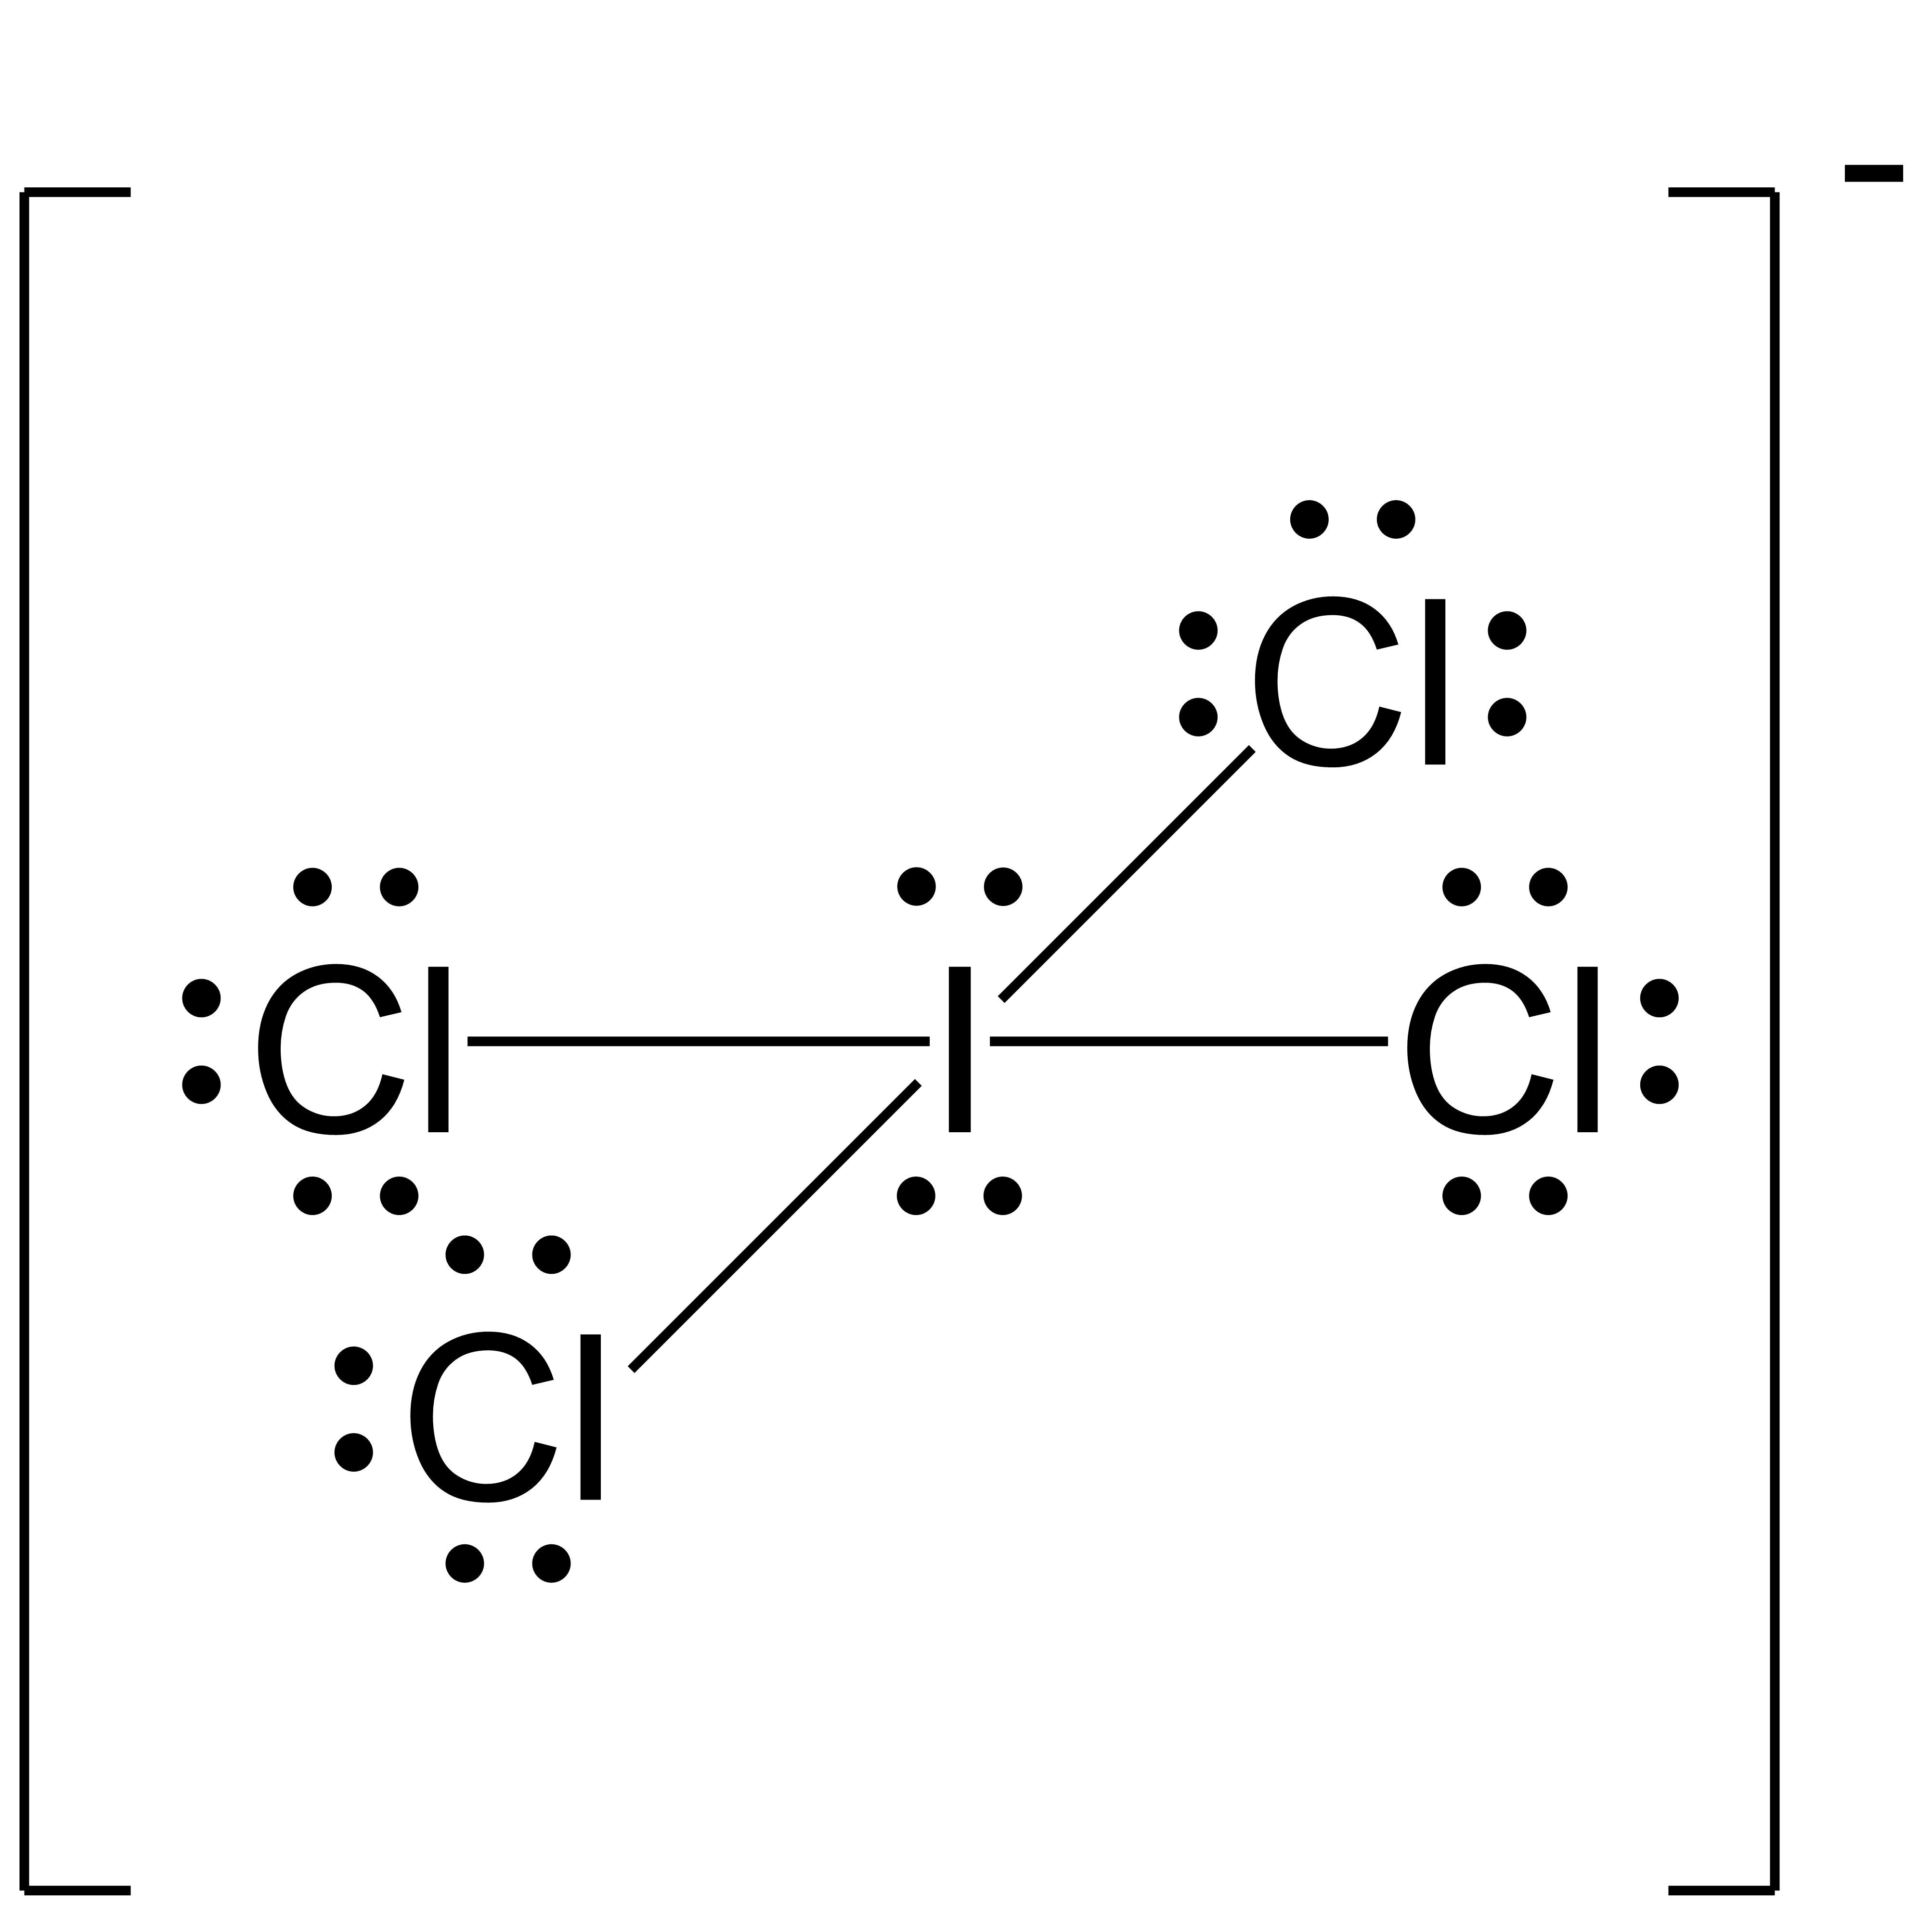 Resonance Structure for ICl4. The central iodine atom is singly bonded to four chlorine atoms. The central iodine atom also has two lone pairs.